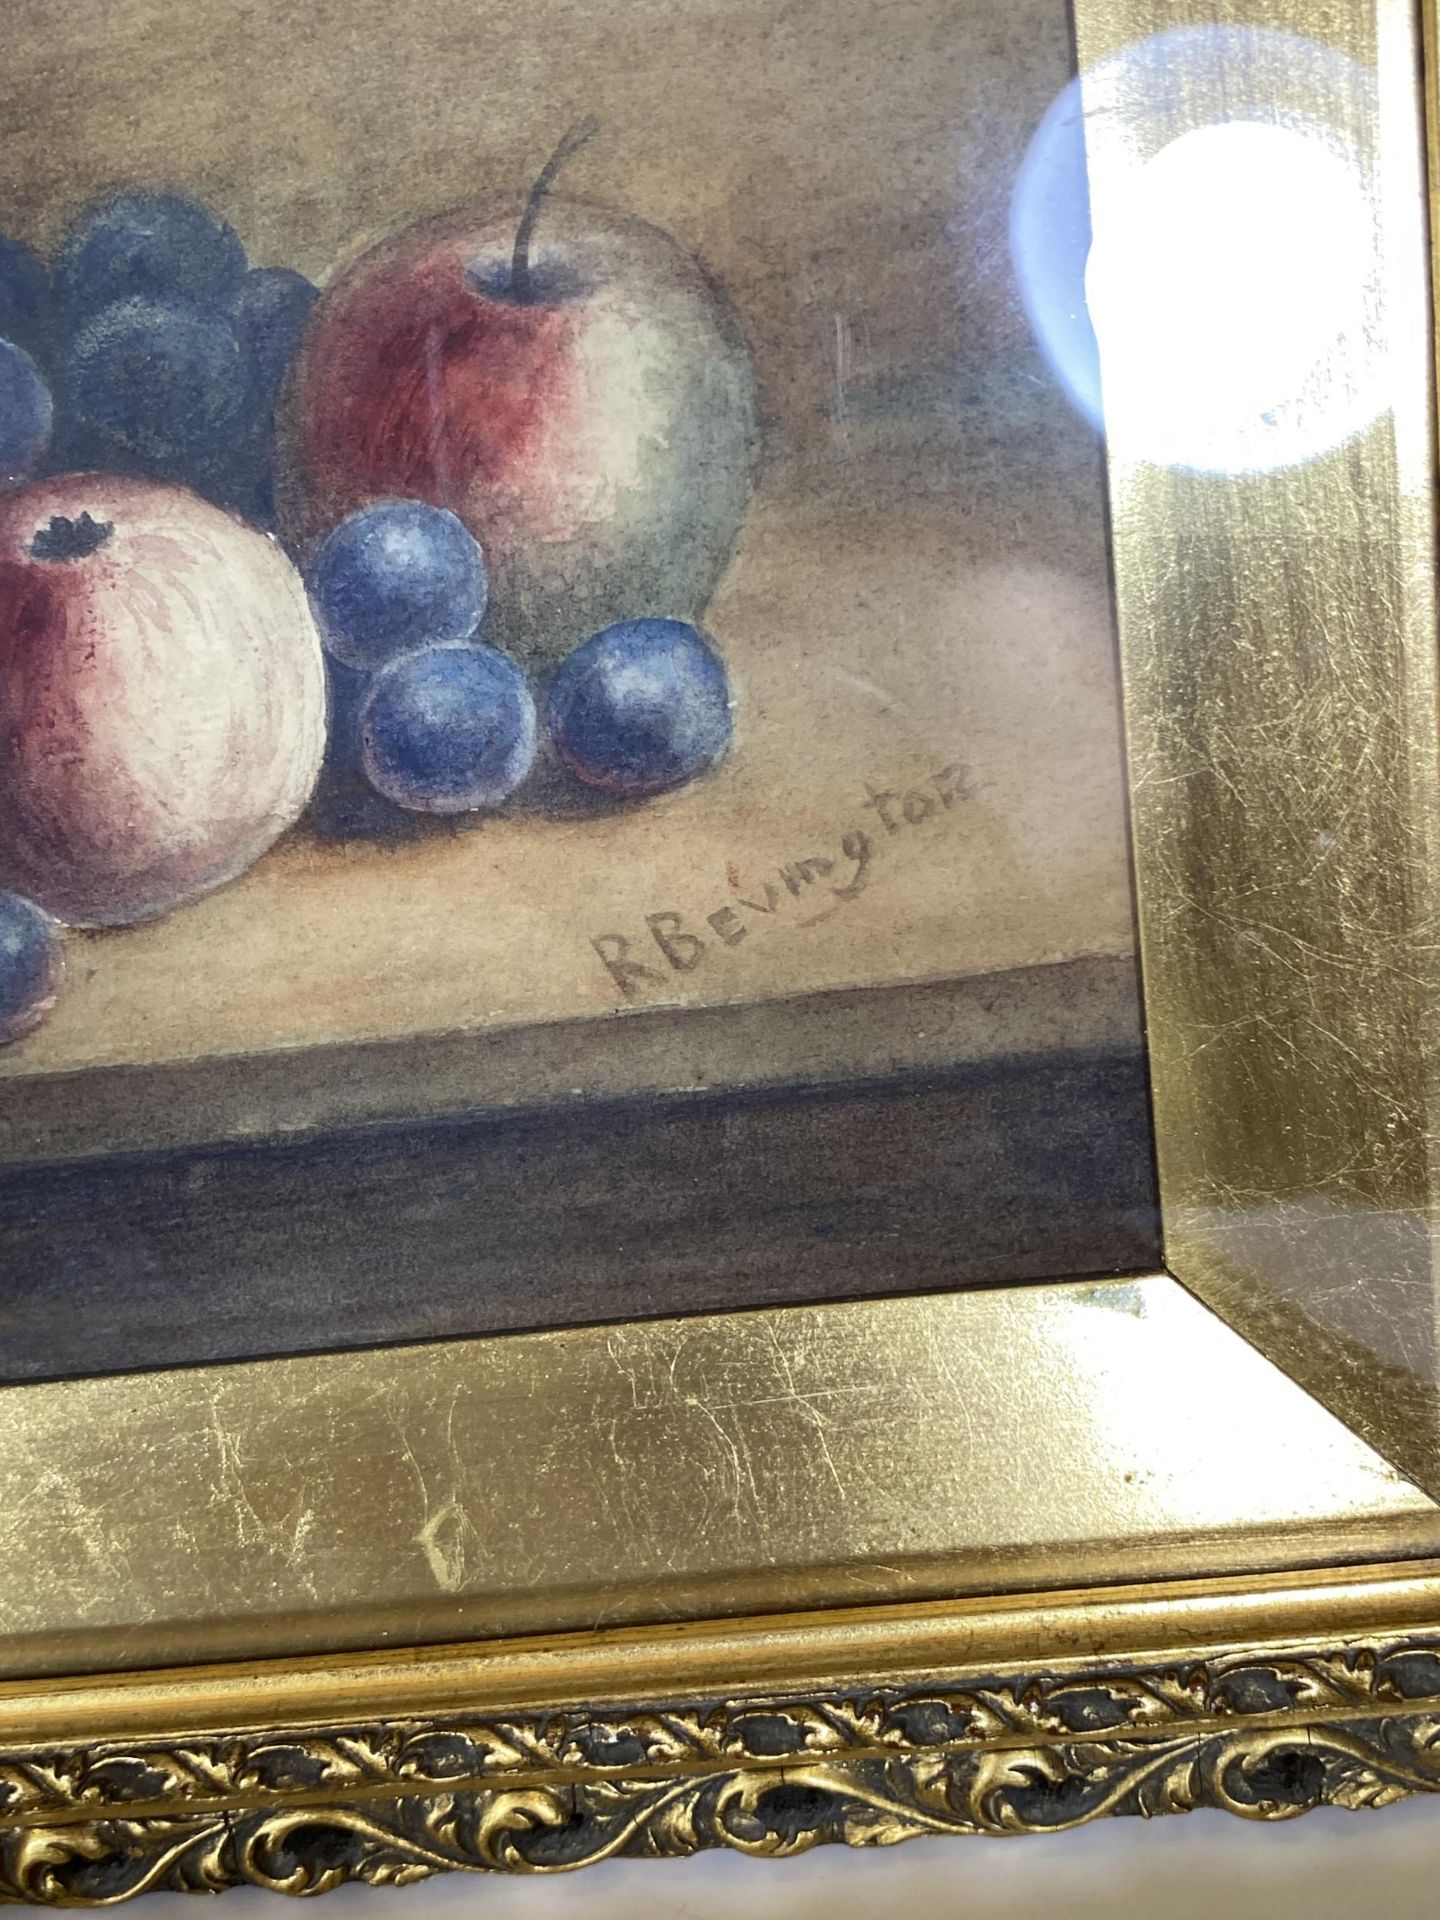 A PAIR OF RAYMOND BEVINGTON, (ROYAL WORCESTER ARTIST), ORIGINAL WATERCOLOURS IN DECORATIVE GILT - Image 5 of 8